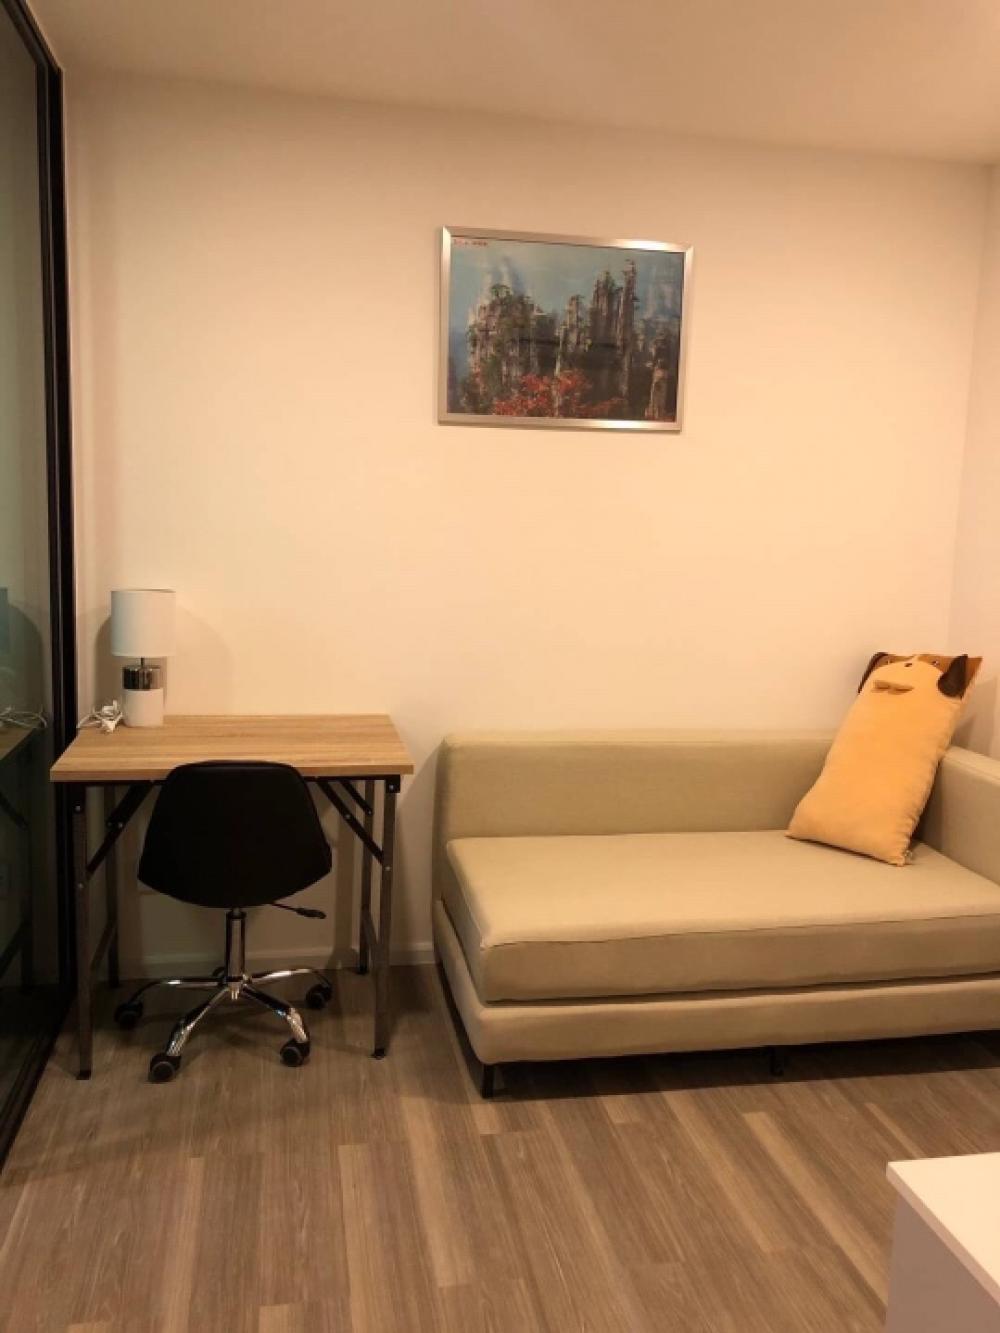 For RentCondoKasetsart, Ratchayothin : 🔥Urgent for rent🔥Kensington Kaset Campus, beautiful room, available, ready to move in. Price negotiable ✅If interested, add Line: @livingperfect